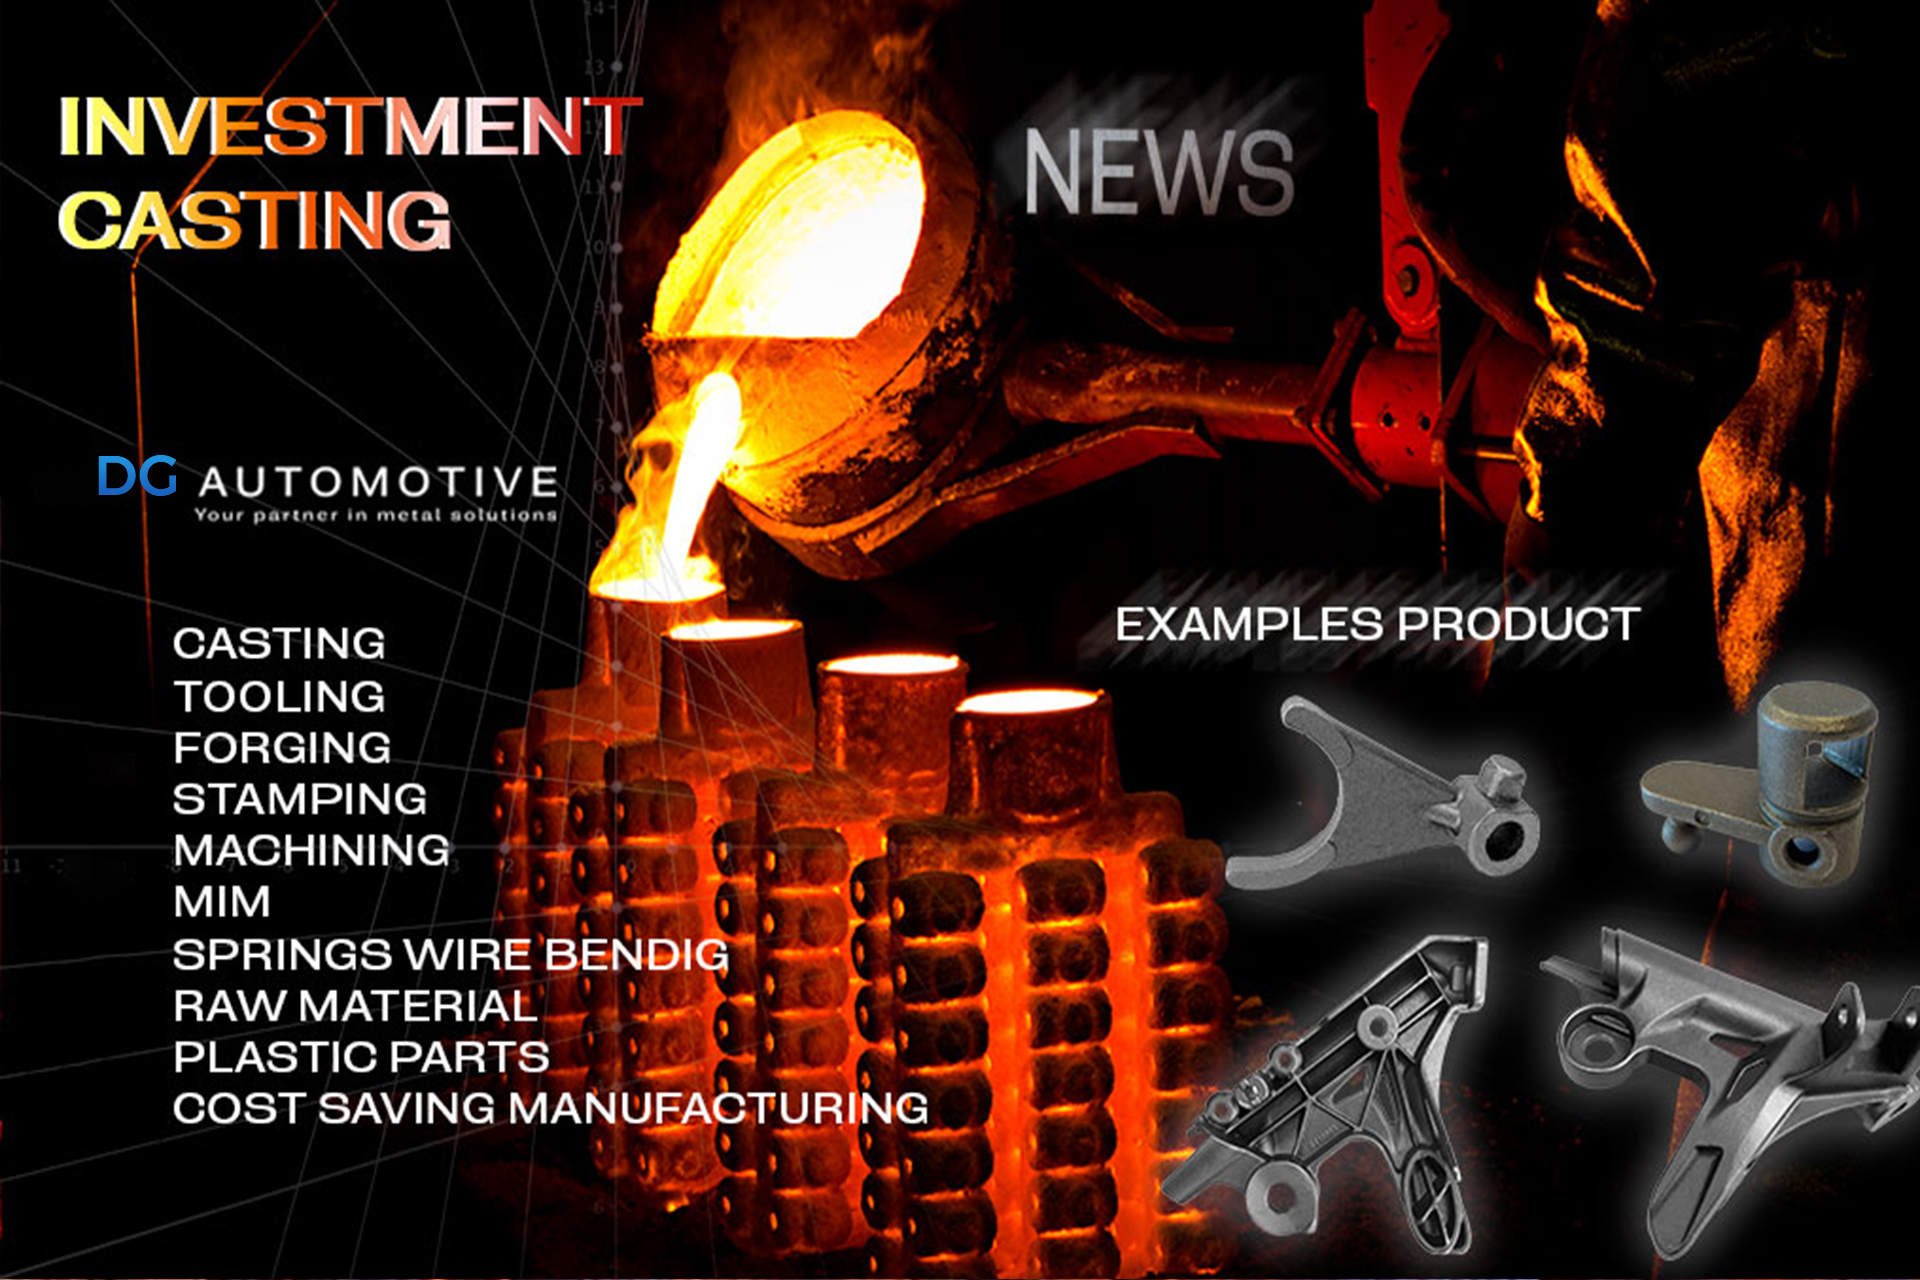 About Investment casting